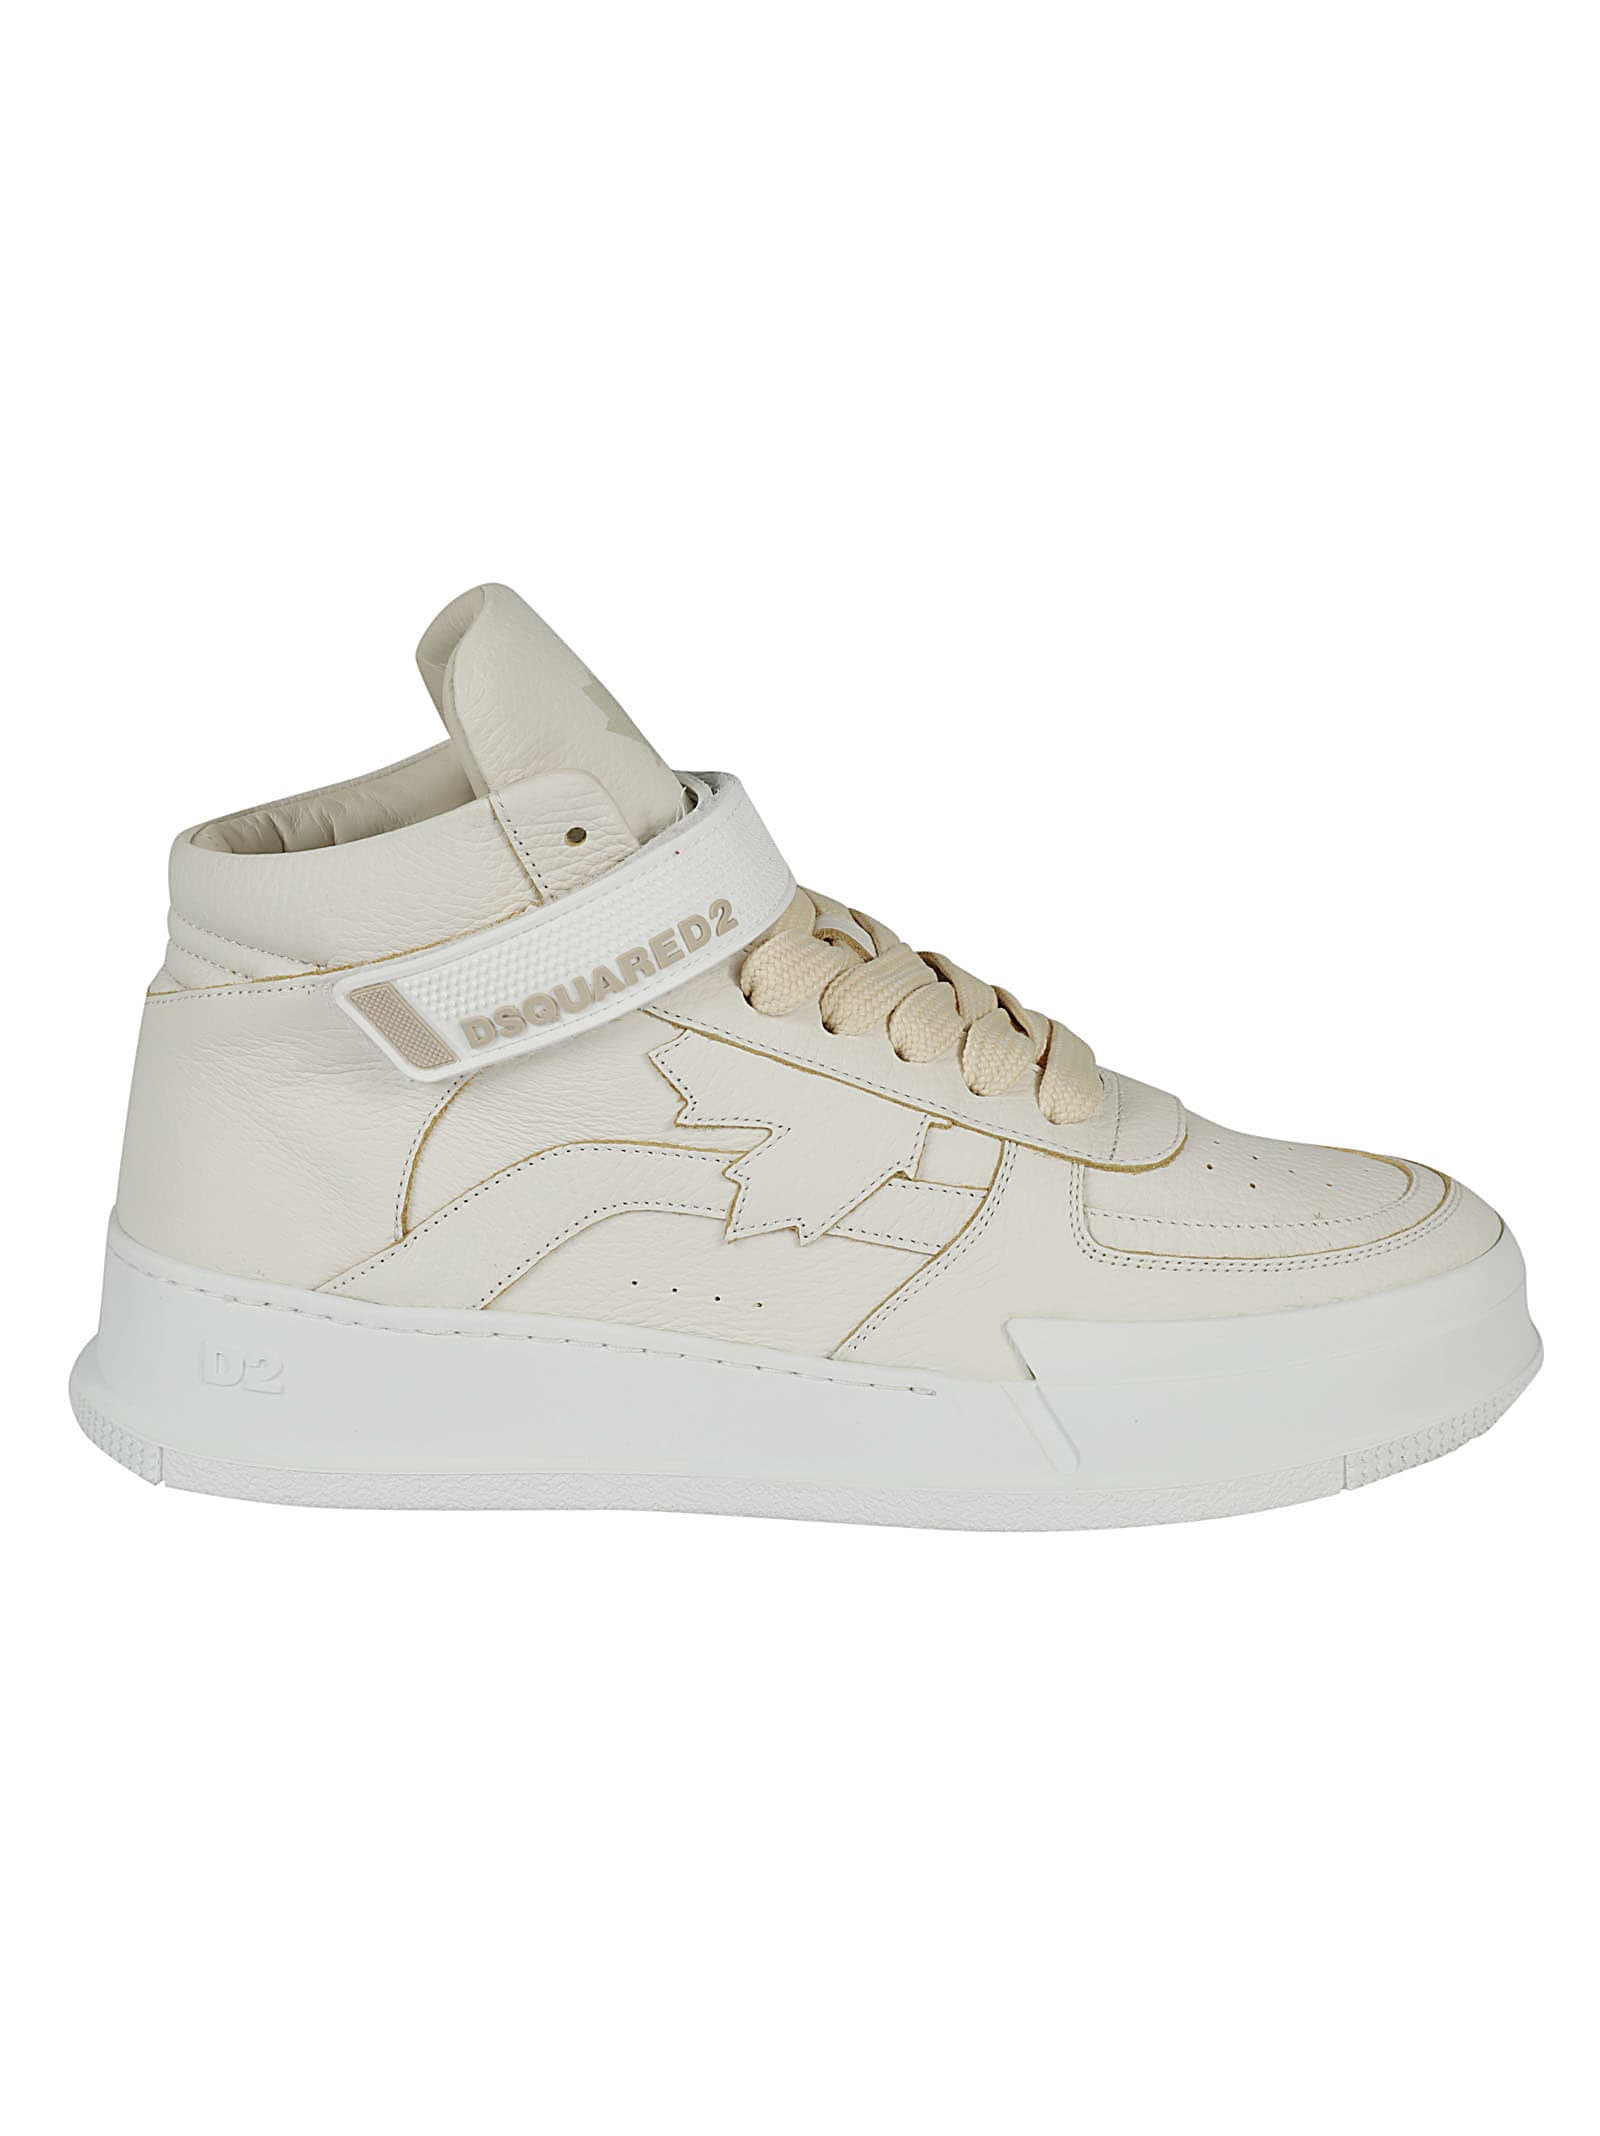 Dsquared2 Thumbled Leather Sneakers